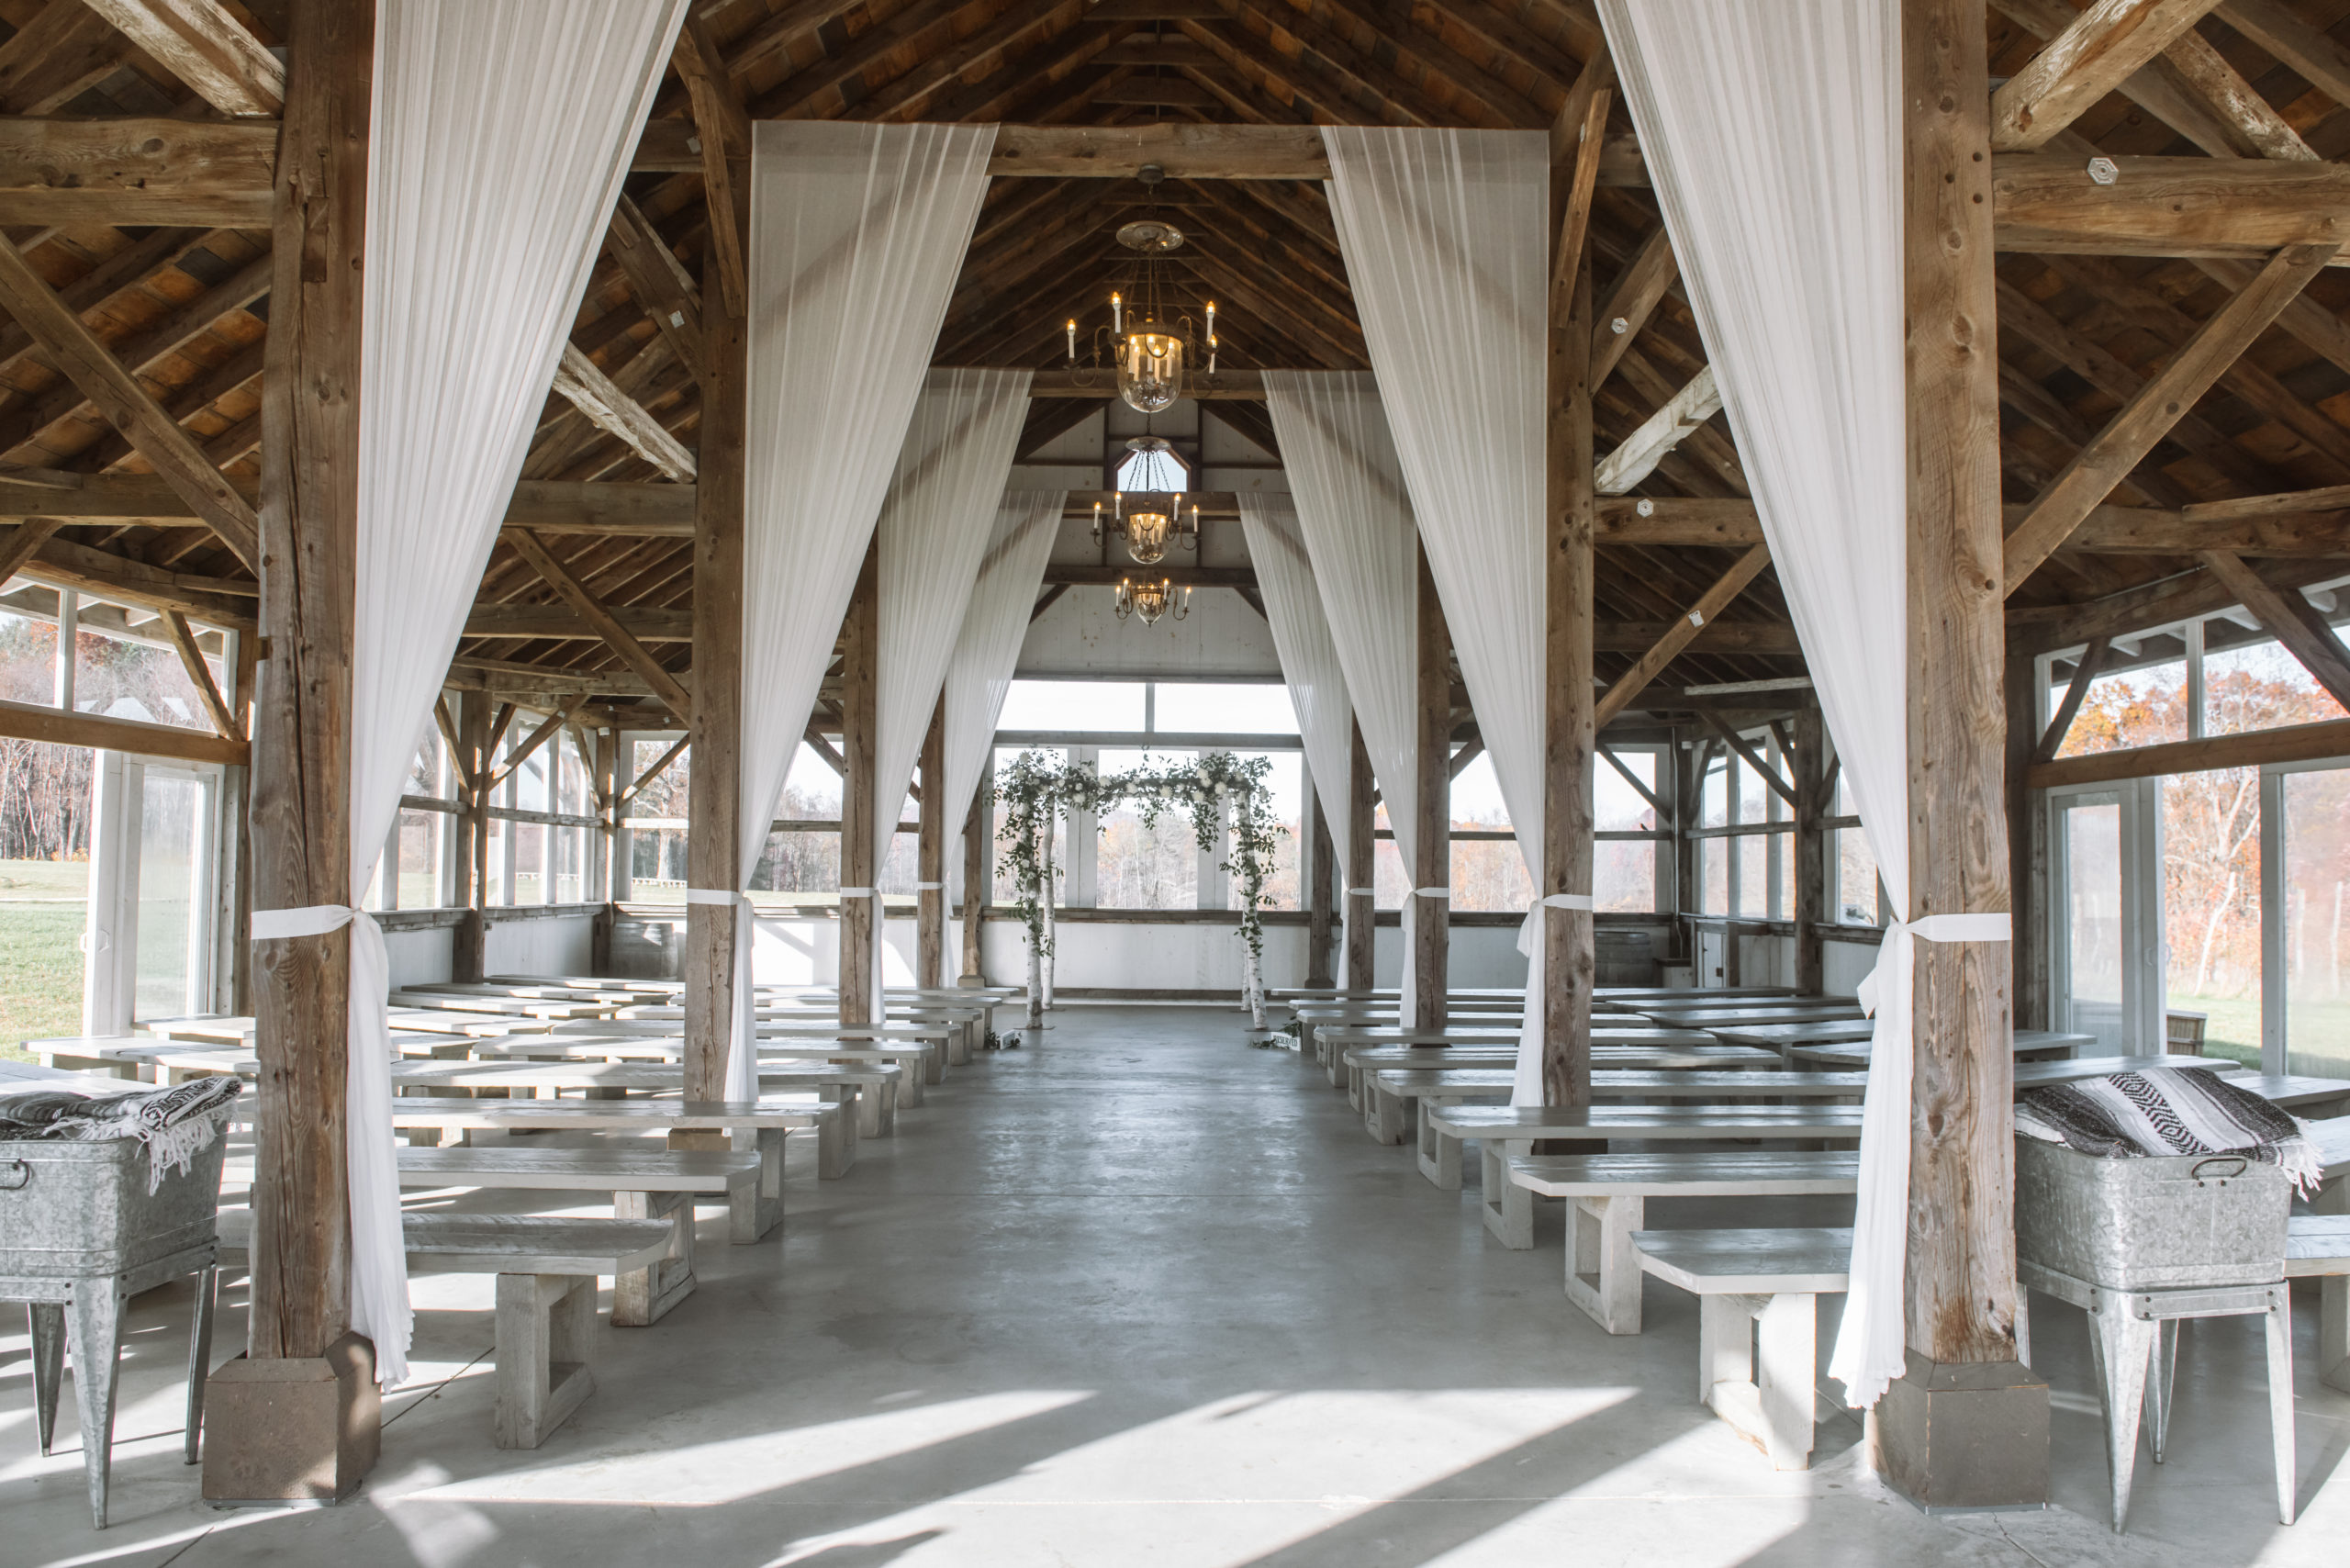 Ceremony location featuring barn beams covered in decorative white sheer curtains. There are aisles of empty wooden benches for the guests to sit on. It is a light-filled area full of glass windows and glass doors. At the end of the aisle is the alter which is comprised of birch tree branches and decorated with greenery and white florals.